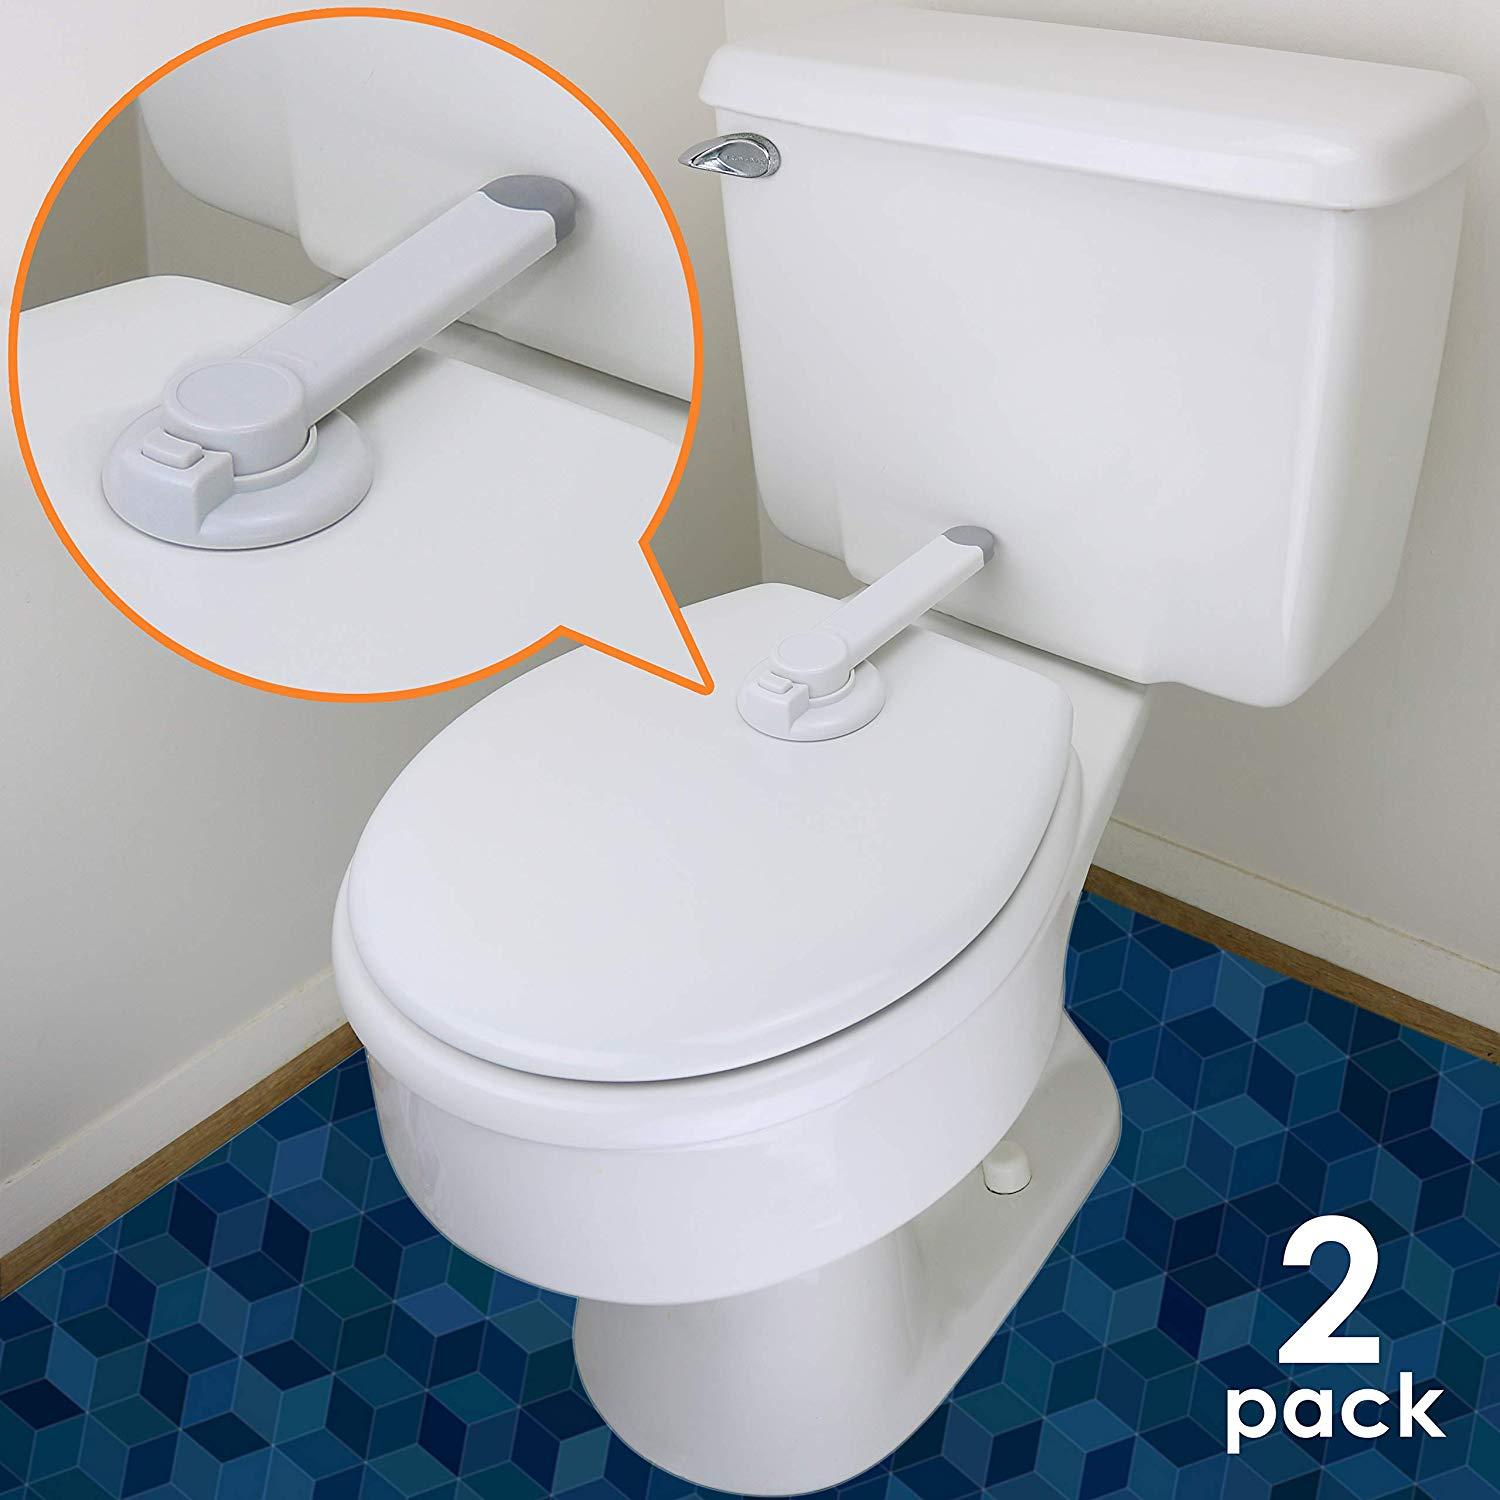 Baby Toilet Lock Ideal Baby Proof Toilet Lid Lock with Arm No Tools